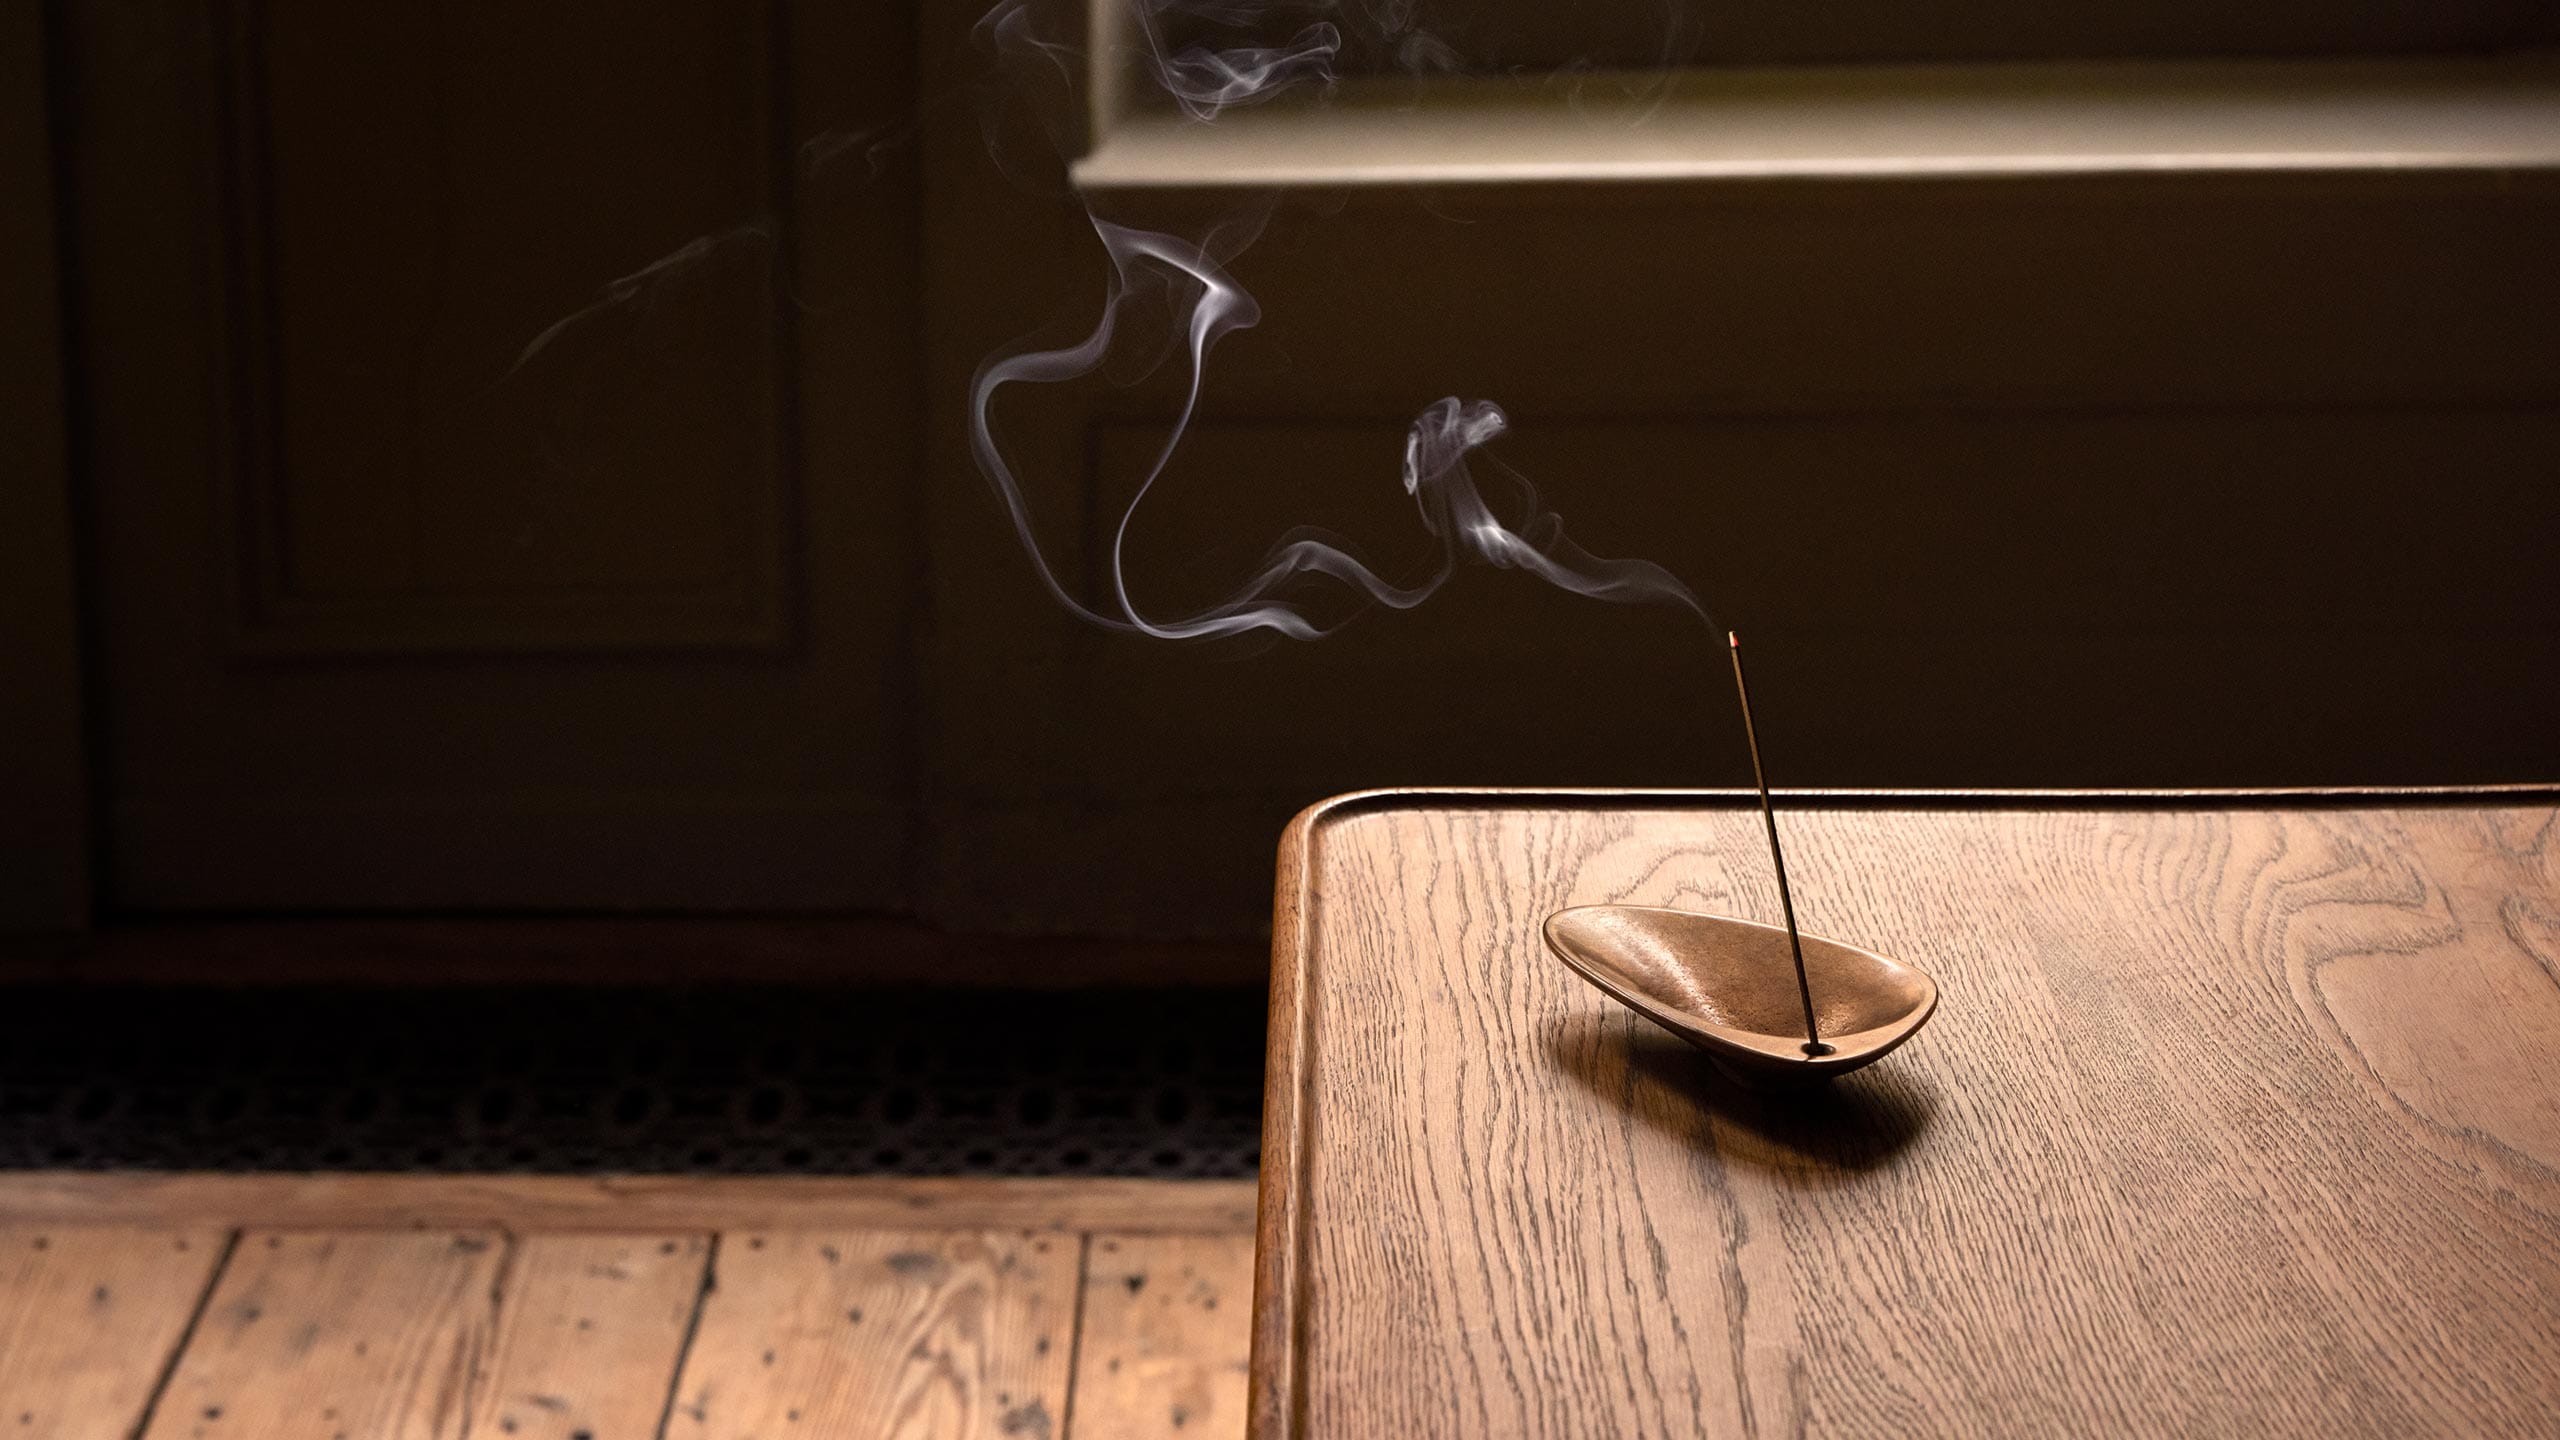 A lit incense stick resting in the Bronze Incense Holder on a wooden table.